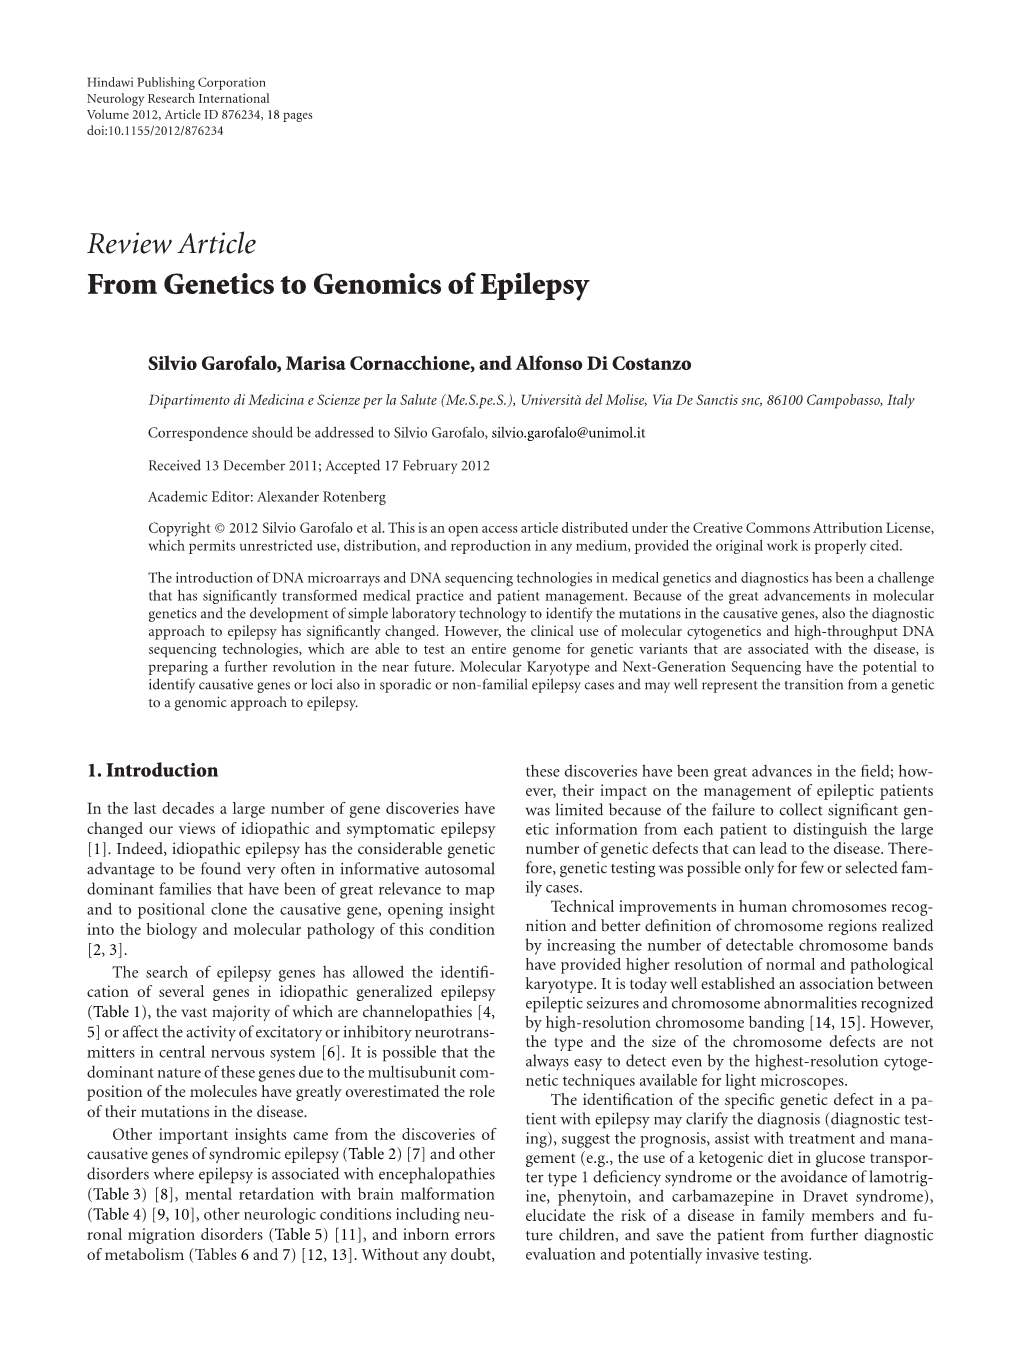 Review Article from Genetics to Genomics of Epilepsy